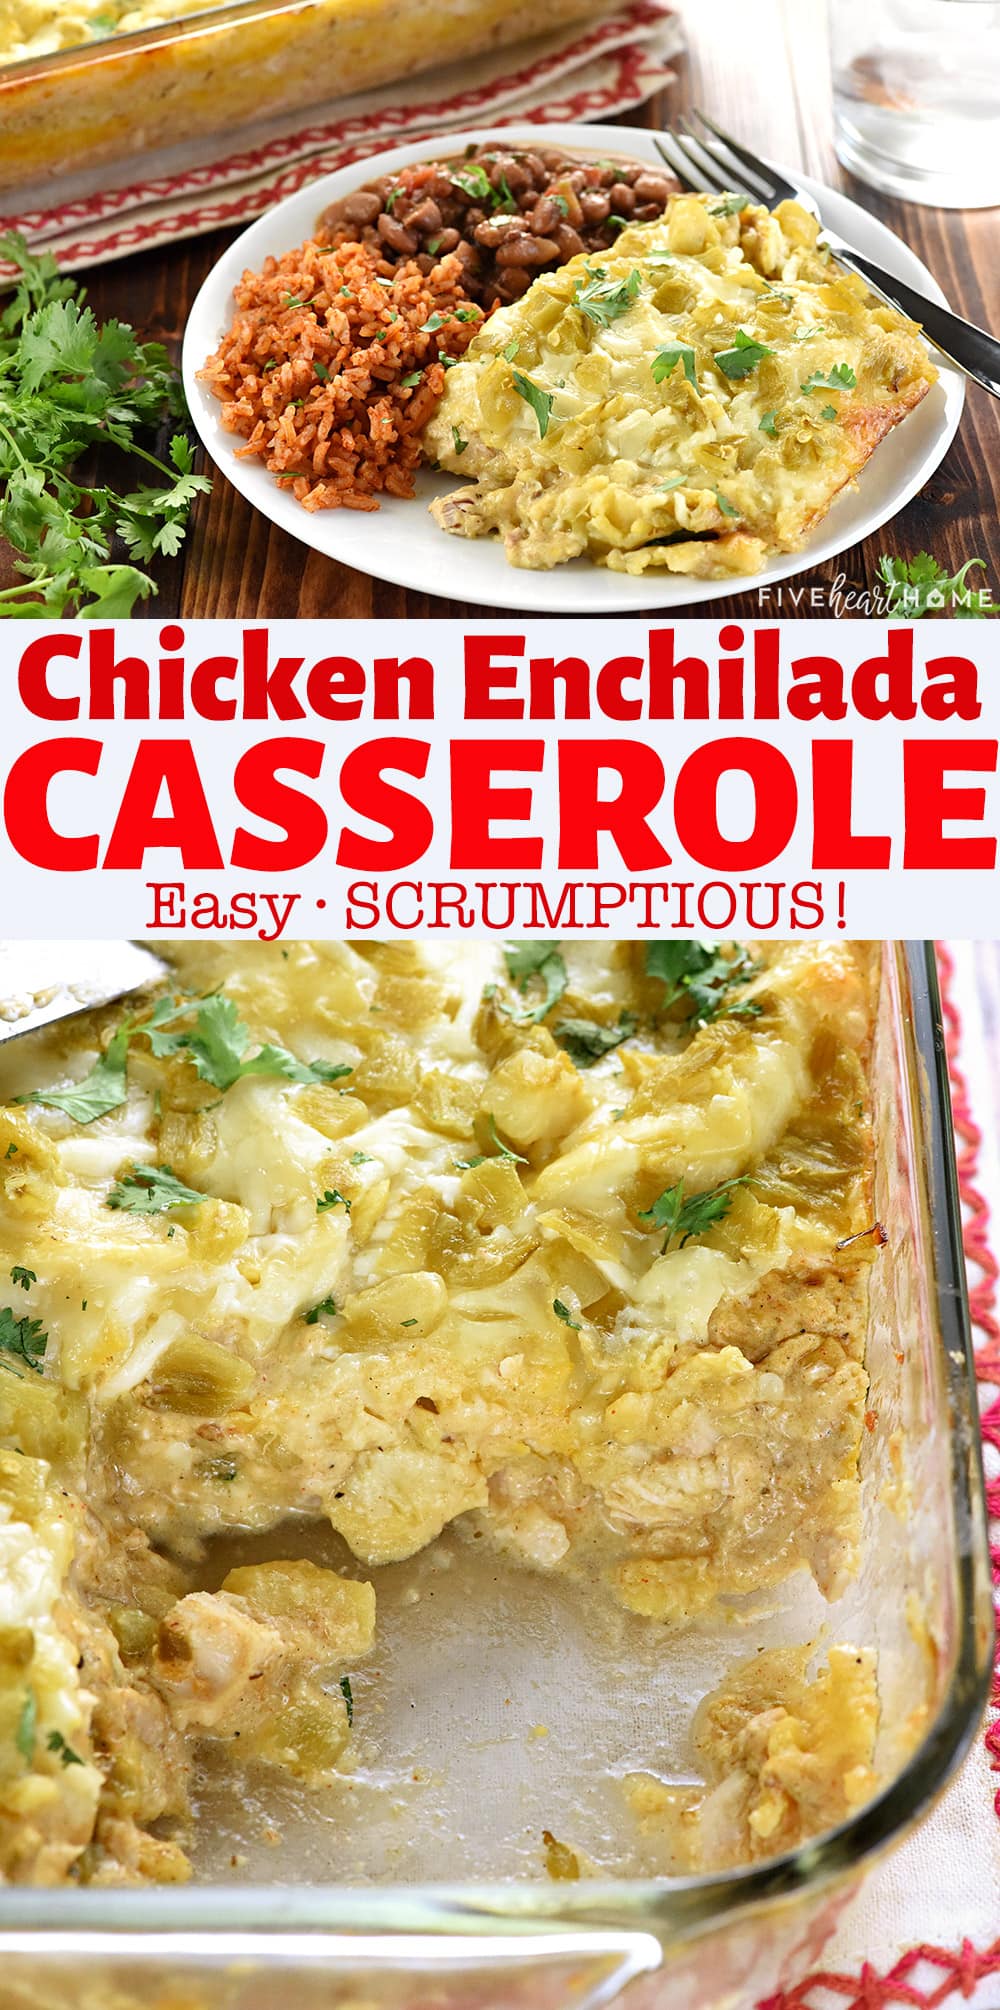 Chicken Enchilada Casserole ~ features all-natural ingredients like salsa verde, green chiles, and a creamy homemade sauce for the great flavor of chicken enchiladas without the work of rolling them! | FiveHeartHome.com via @fivehearthome